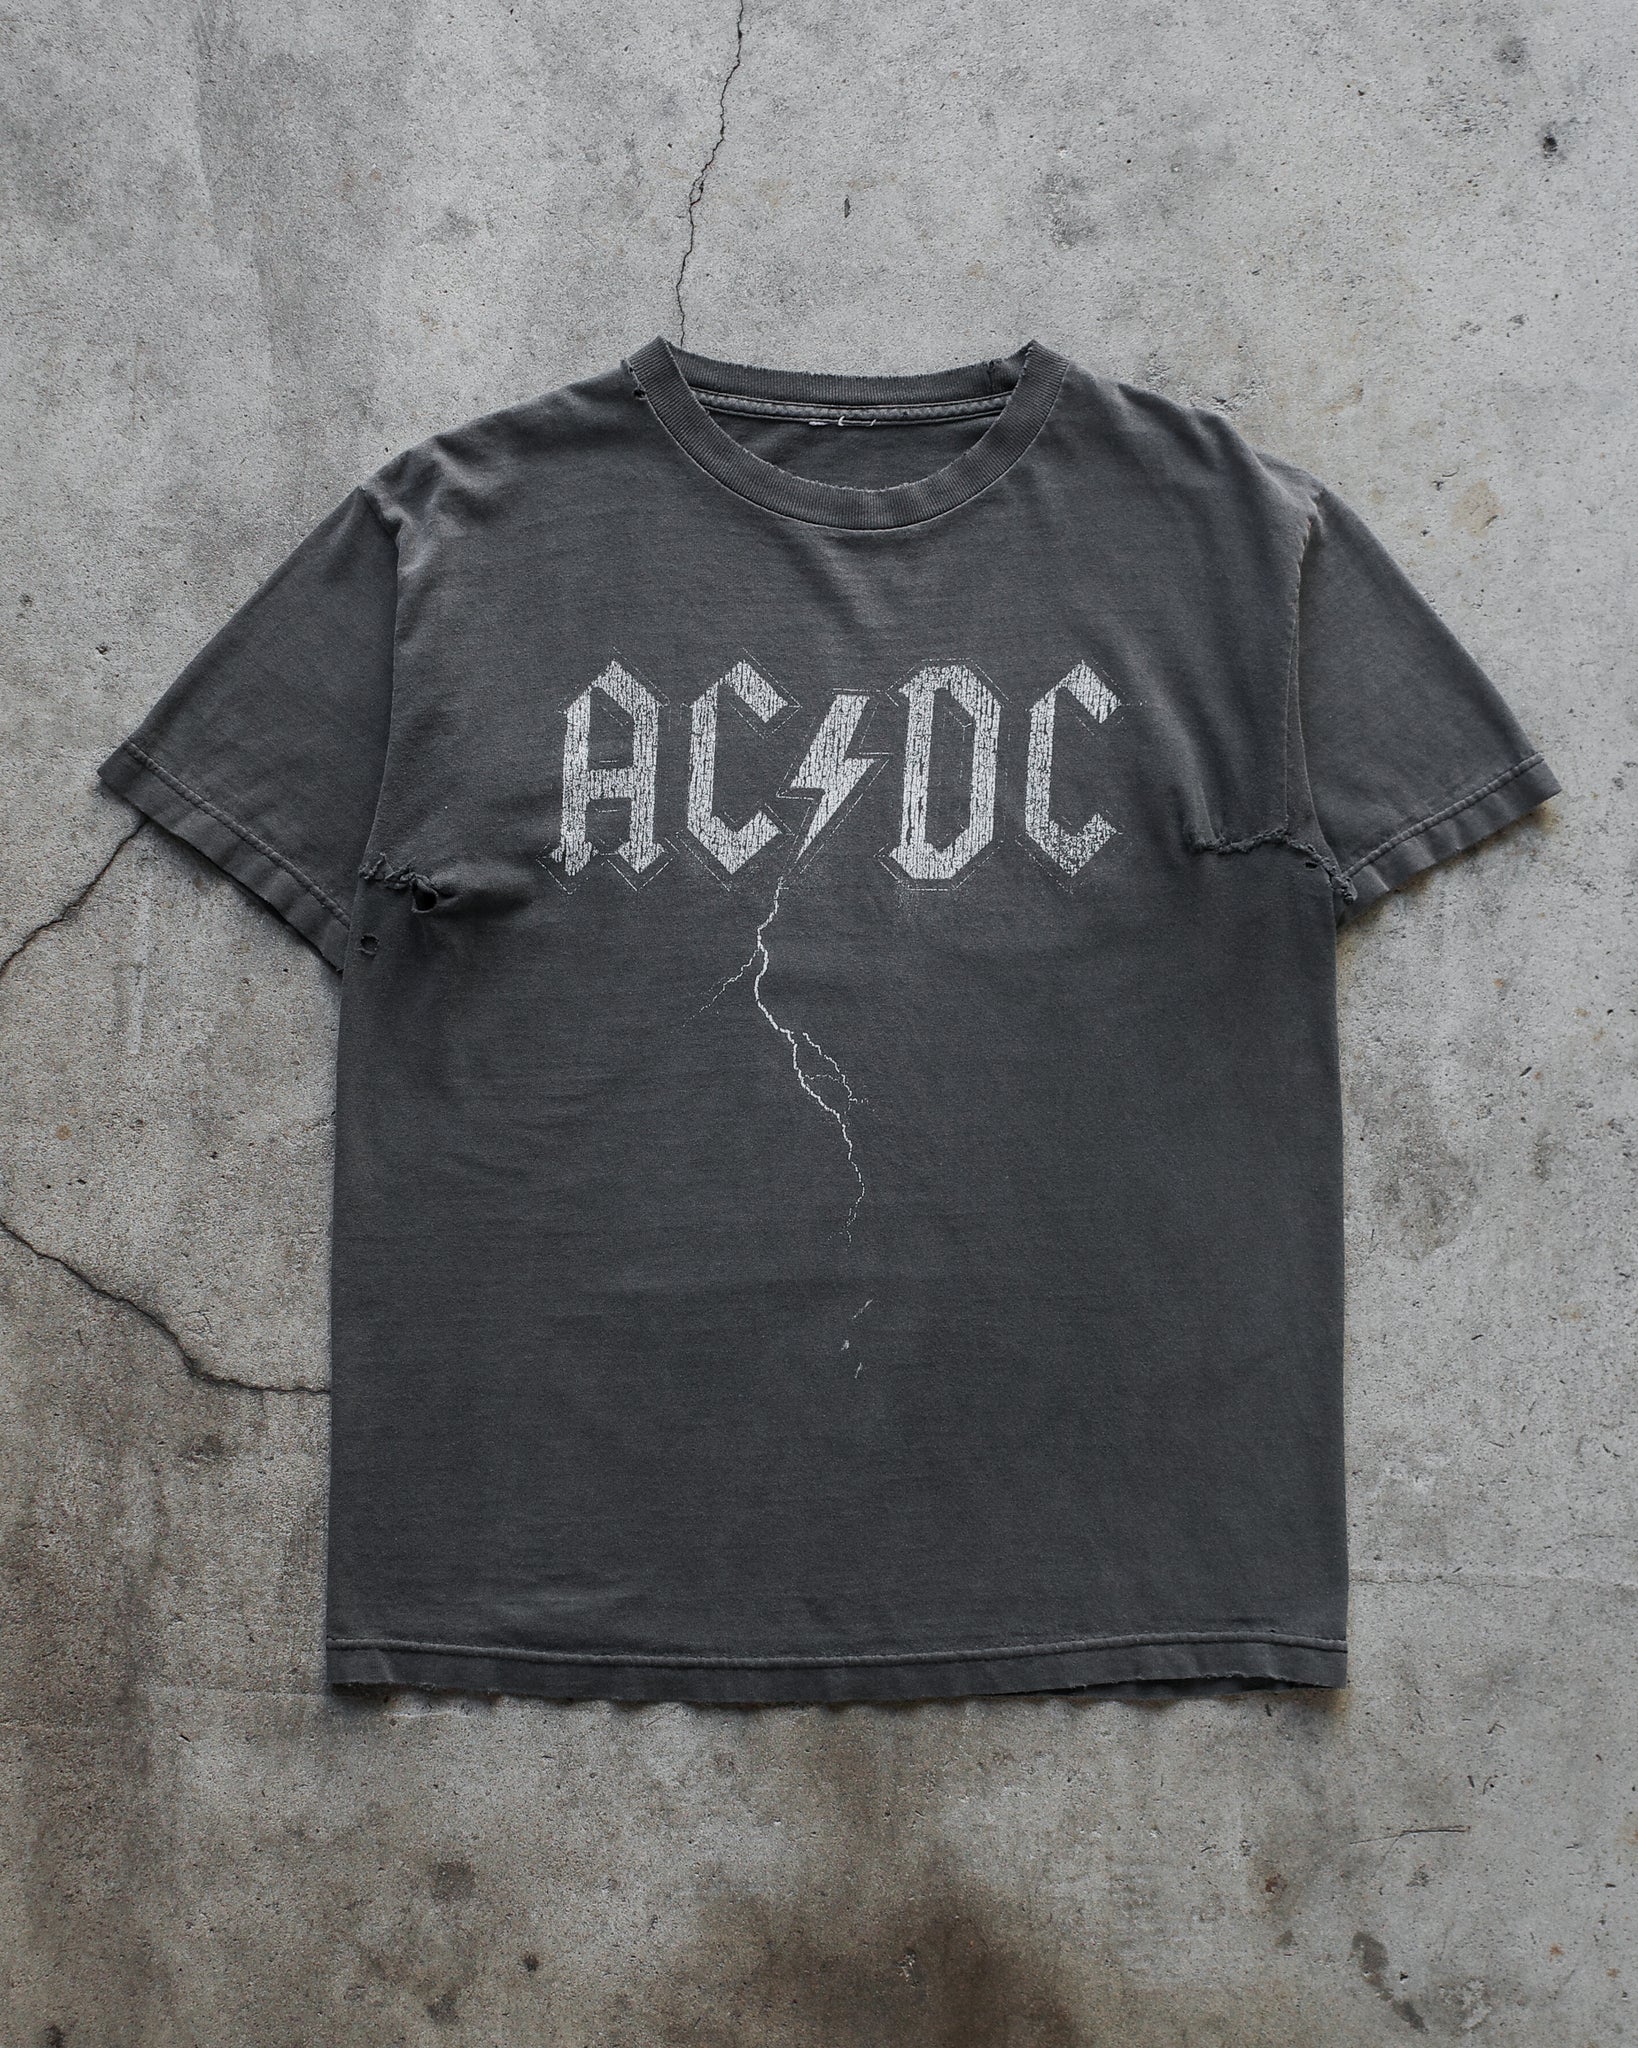 Early 2000s Repaired acdc Tee